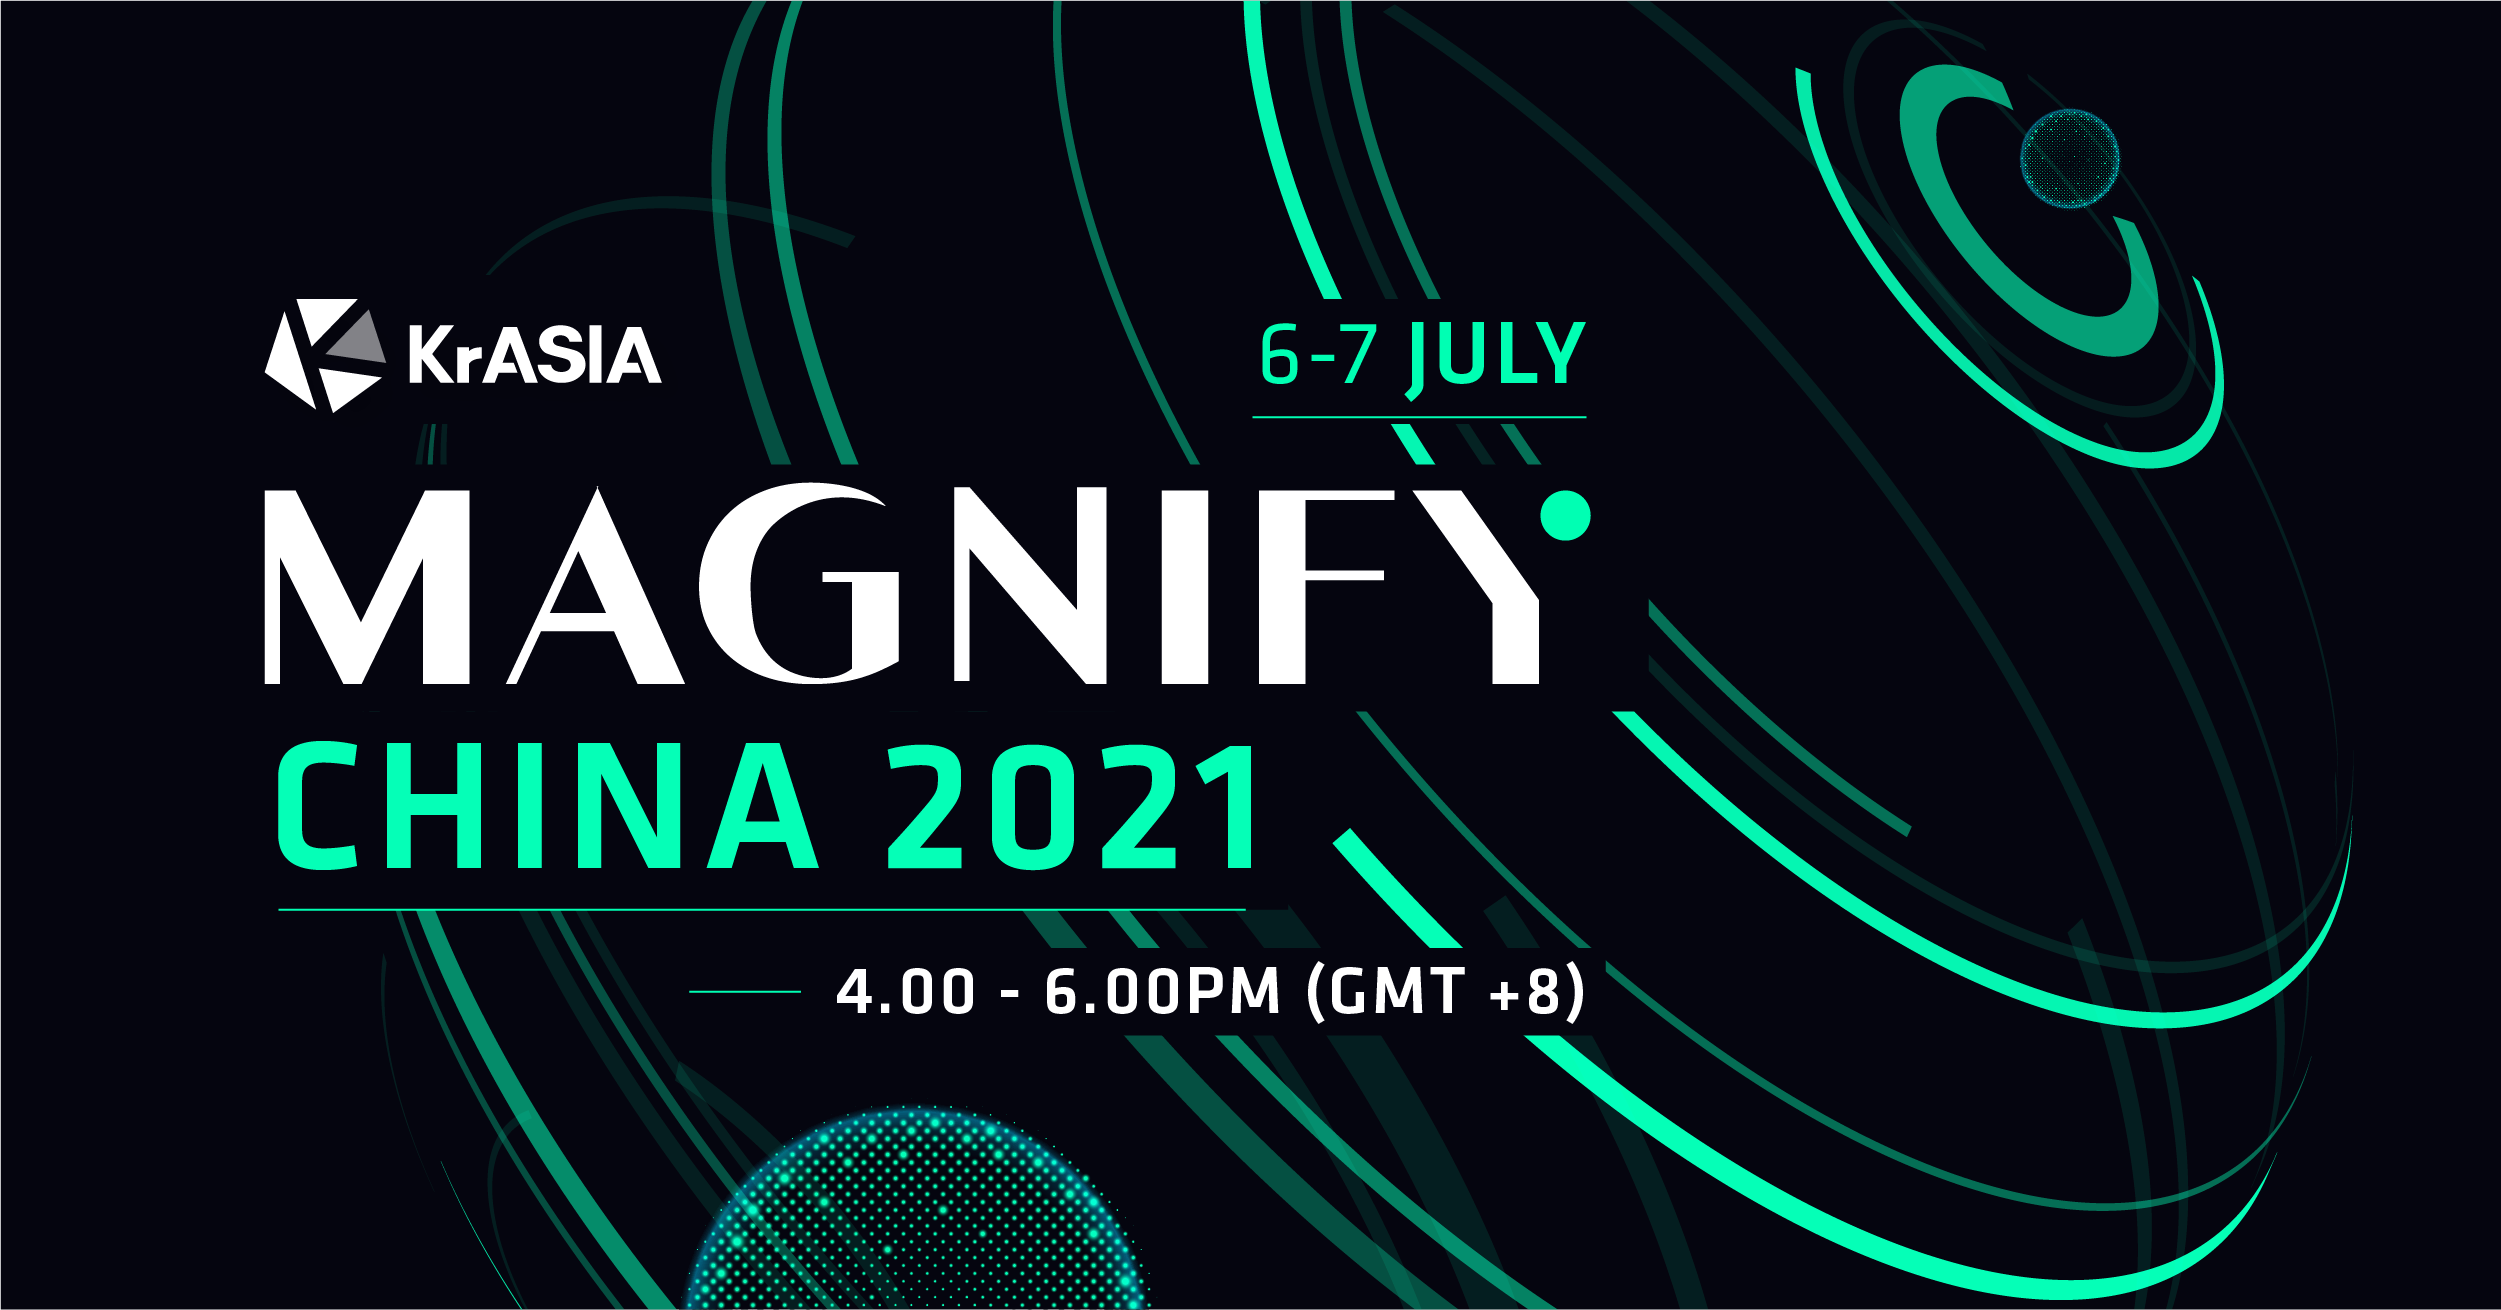 Magnify China 2021: Get the latest insights into China’s sharpest innovations